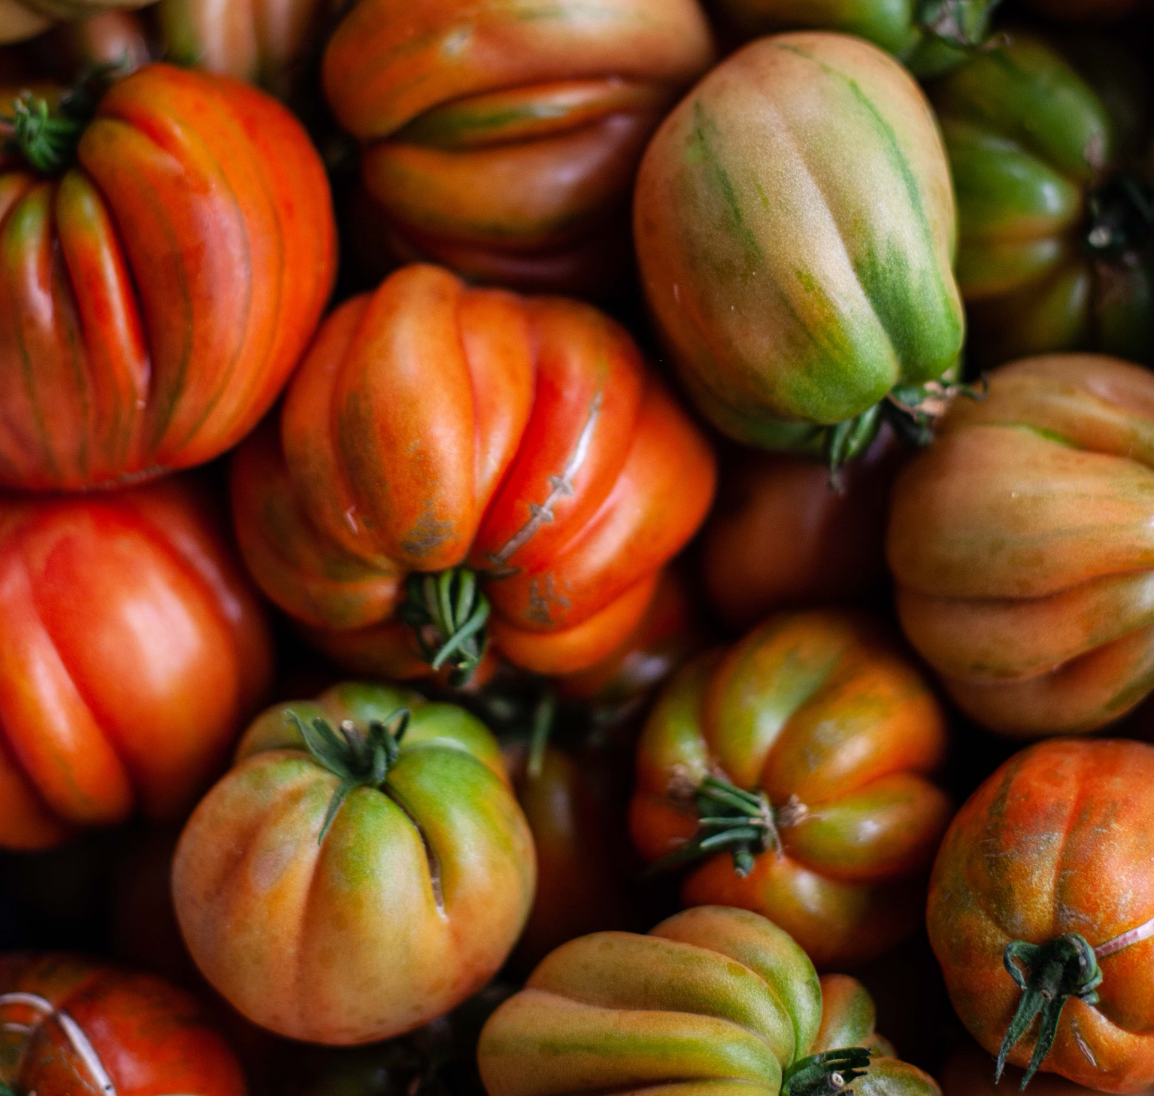 Harvesting Your Homegrown Tomatoes